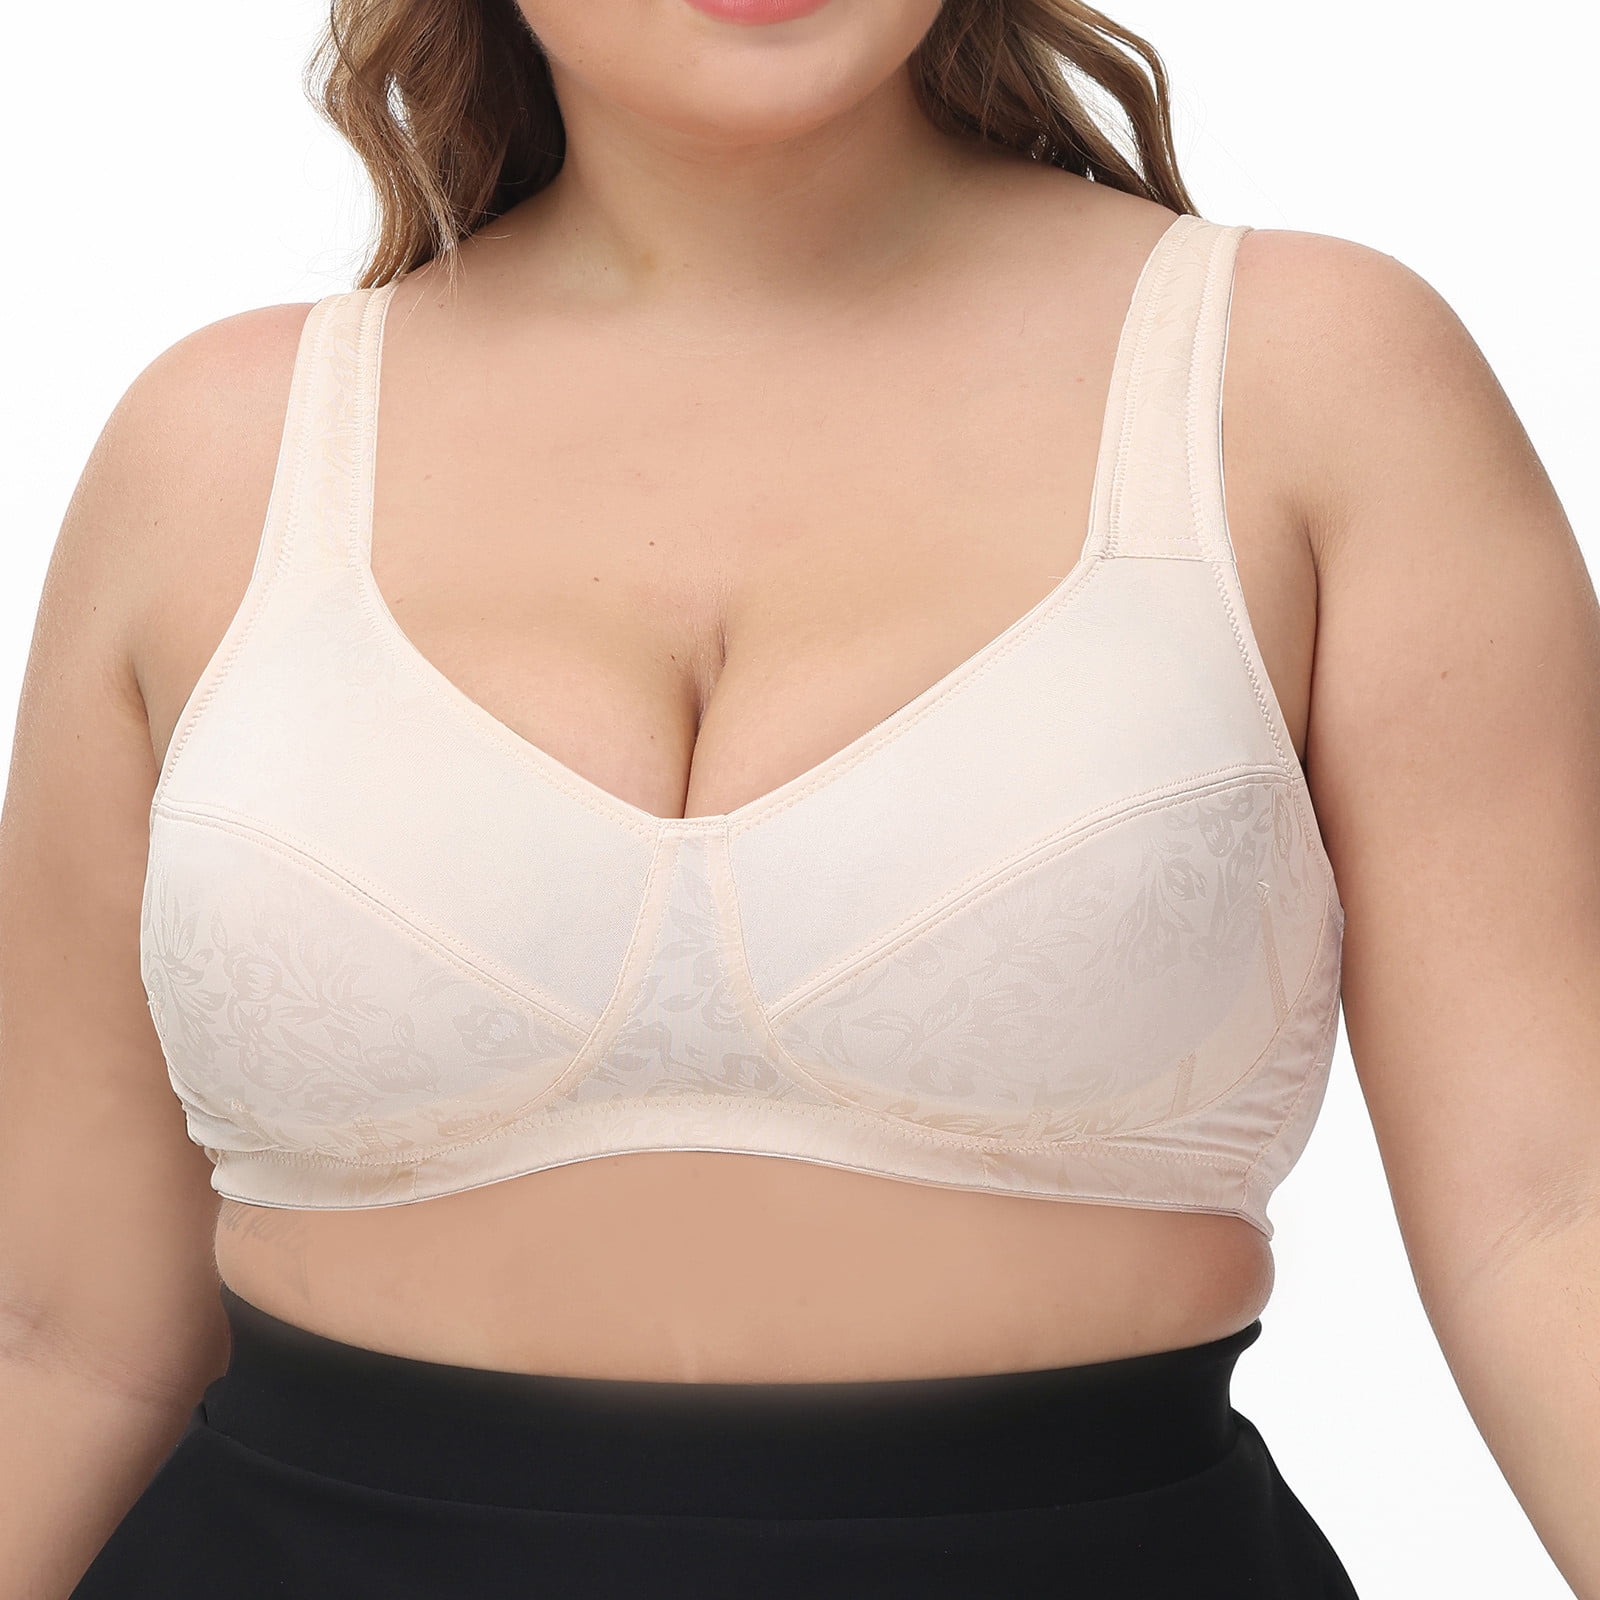 TIANEK Sports Bra for Women Casual T shirt Smooth Seamless Balconette shapermint  Plus Size Strap Breathable Push Up Unpadded Seamless Full Underwear  Clearance 